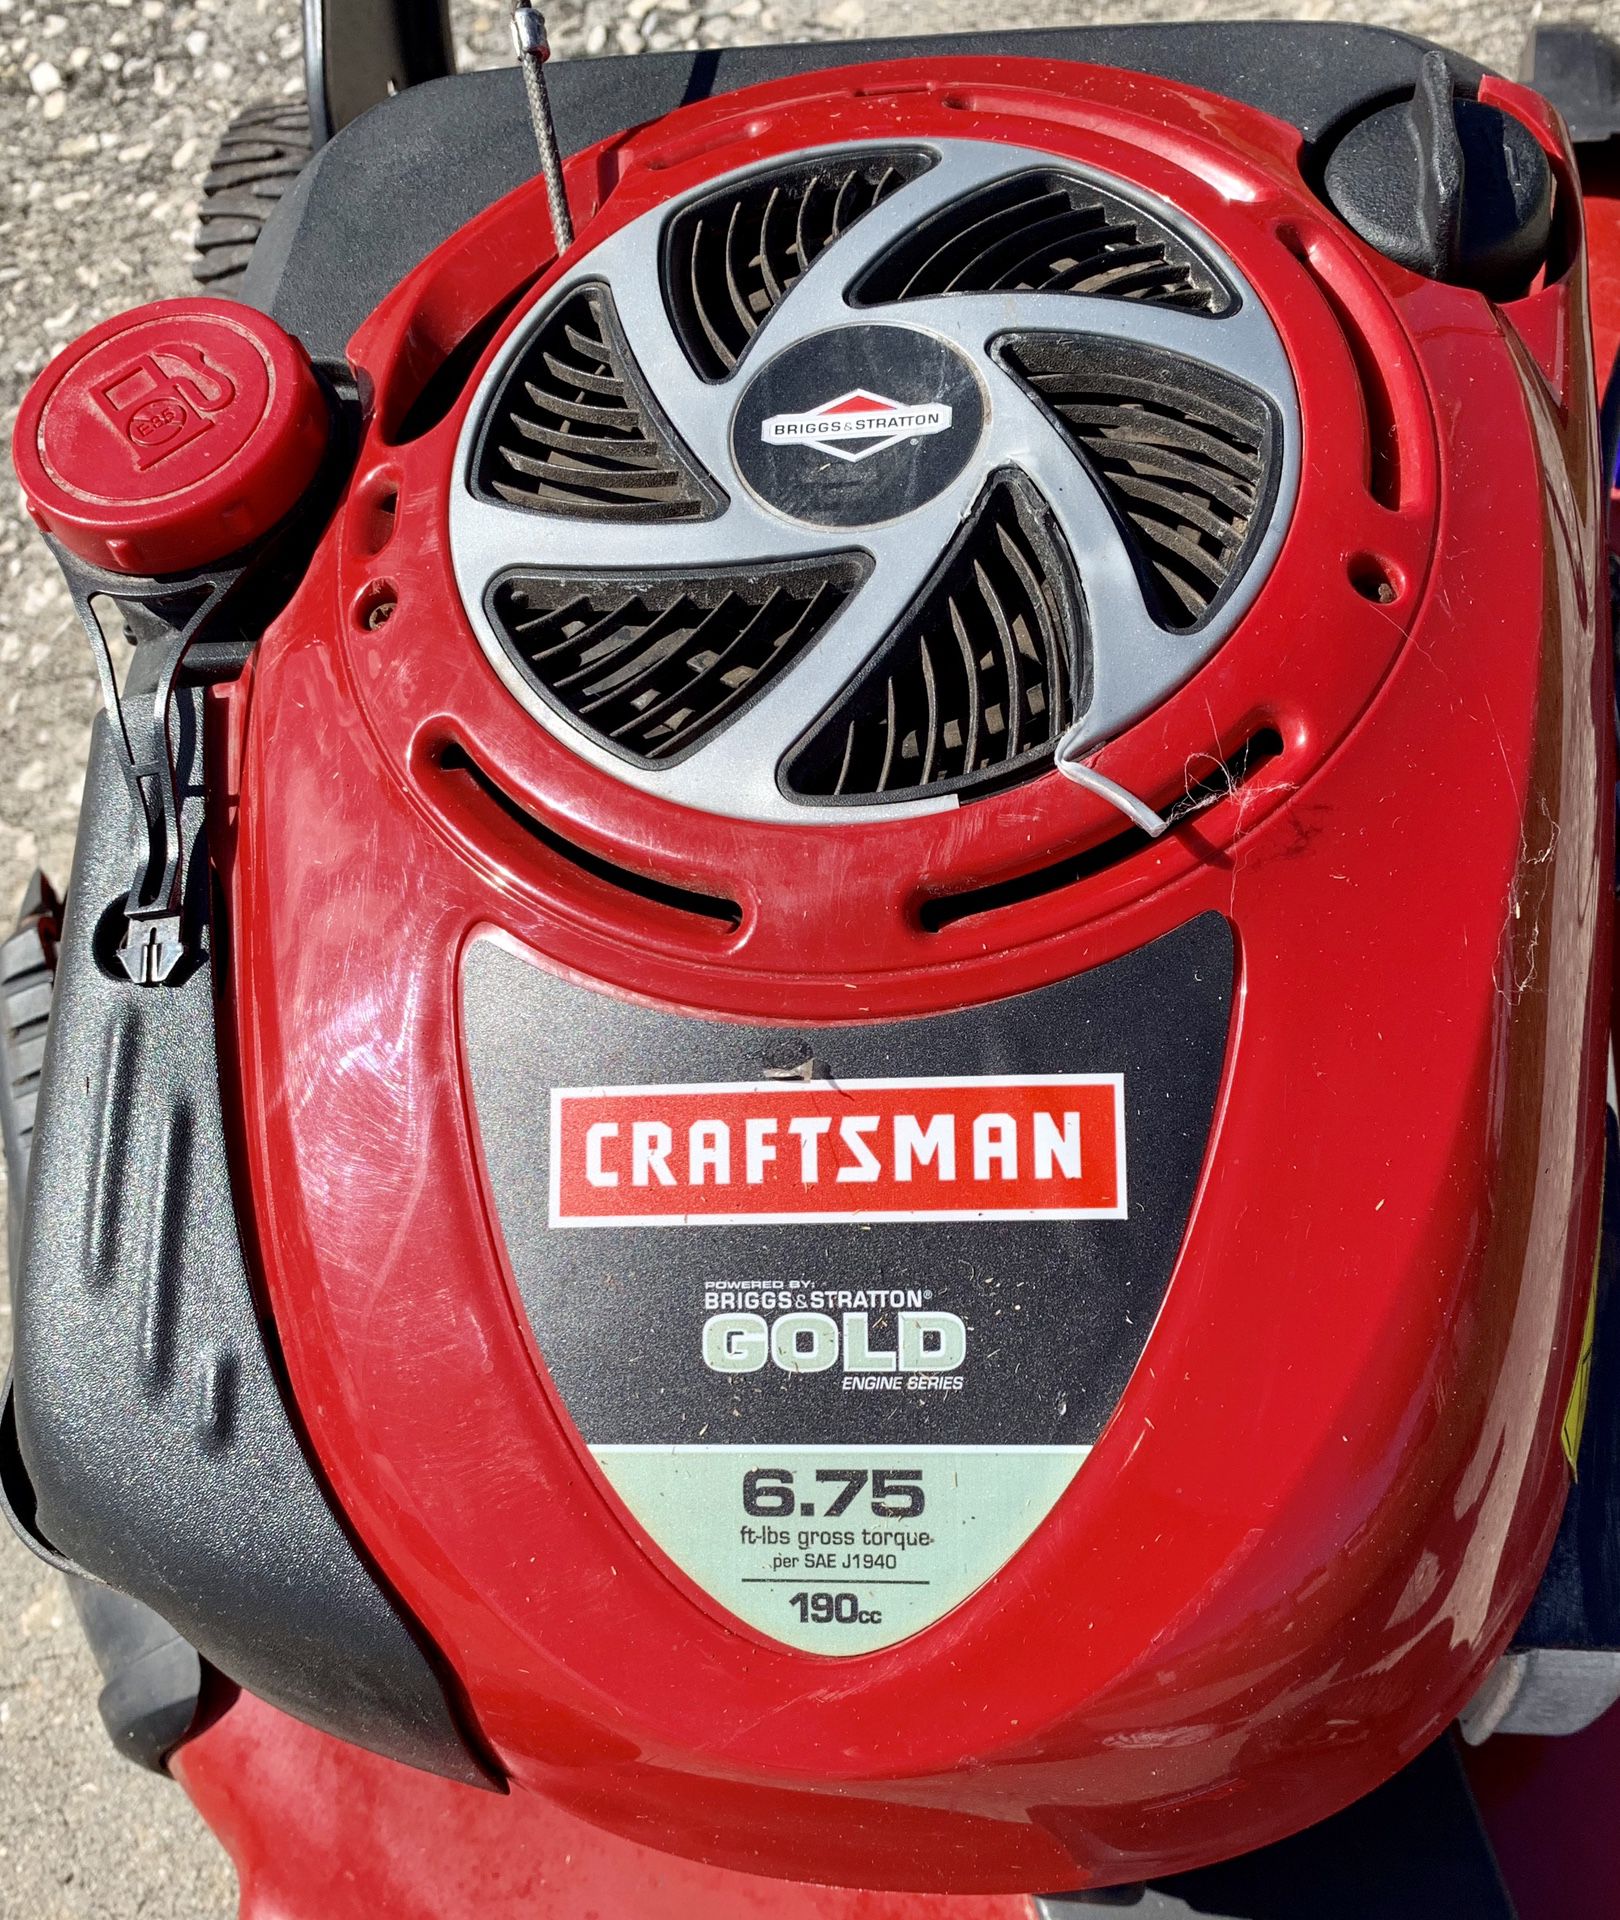 Craftsman GOLD Edition 22” Self Propelled Lawn Mower - Starts 1st Pull - 6.75hp Engine Works Great